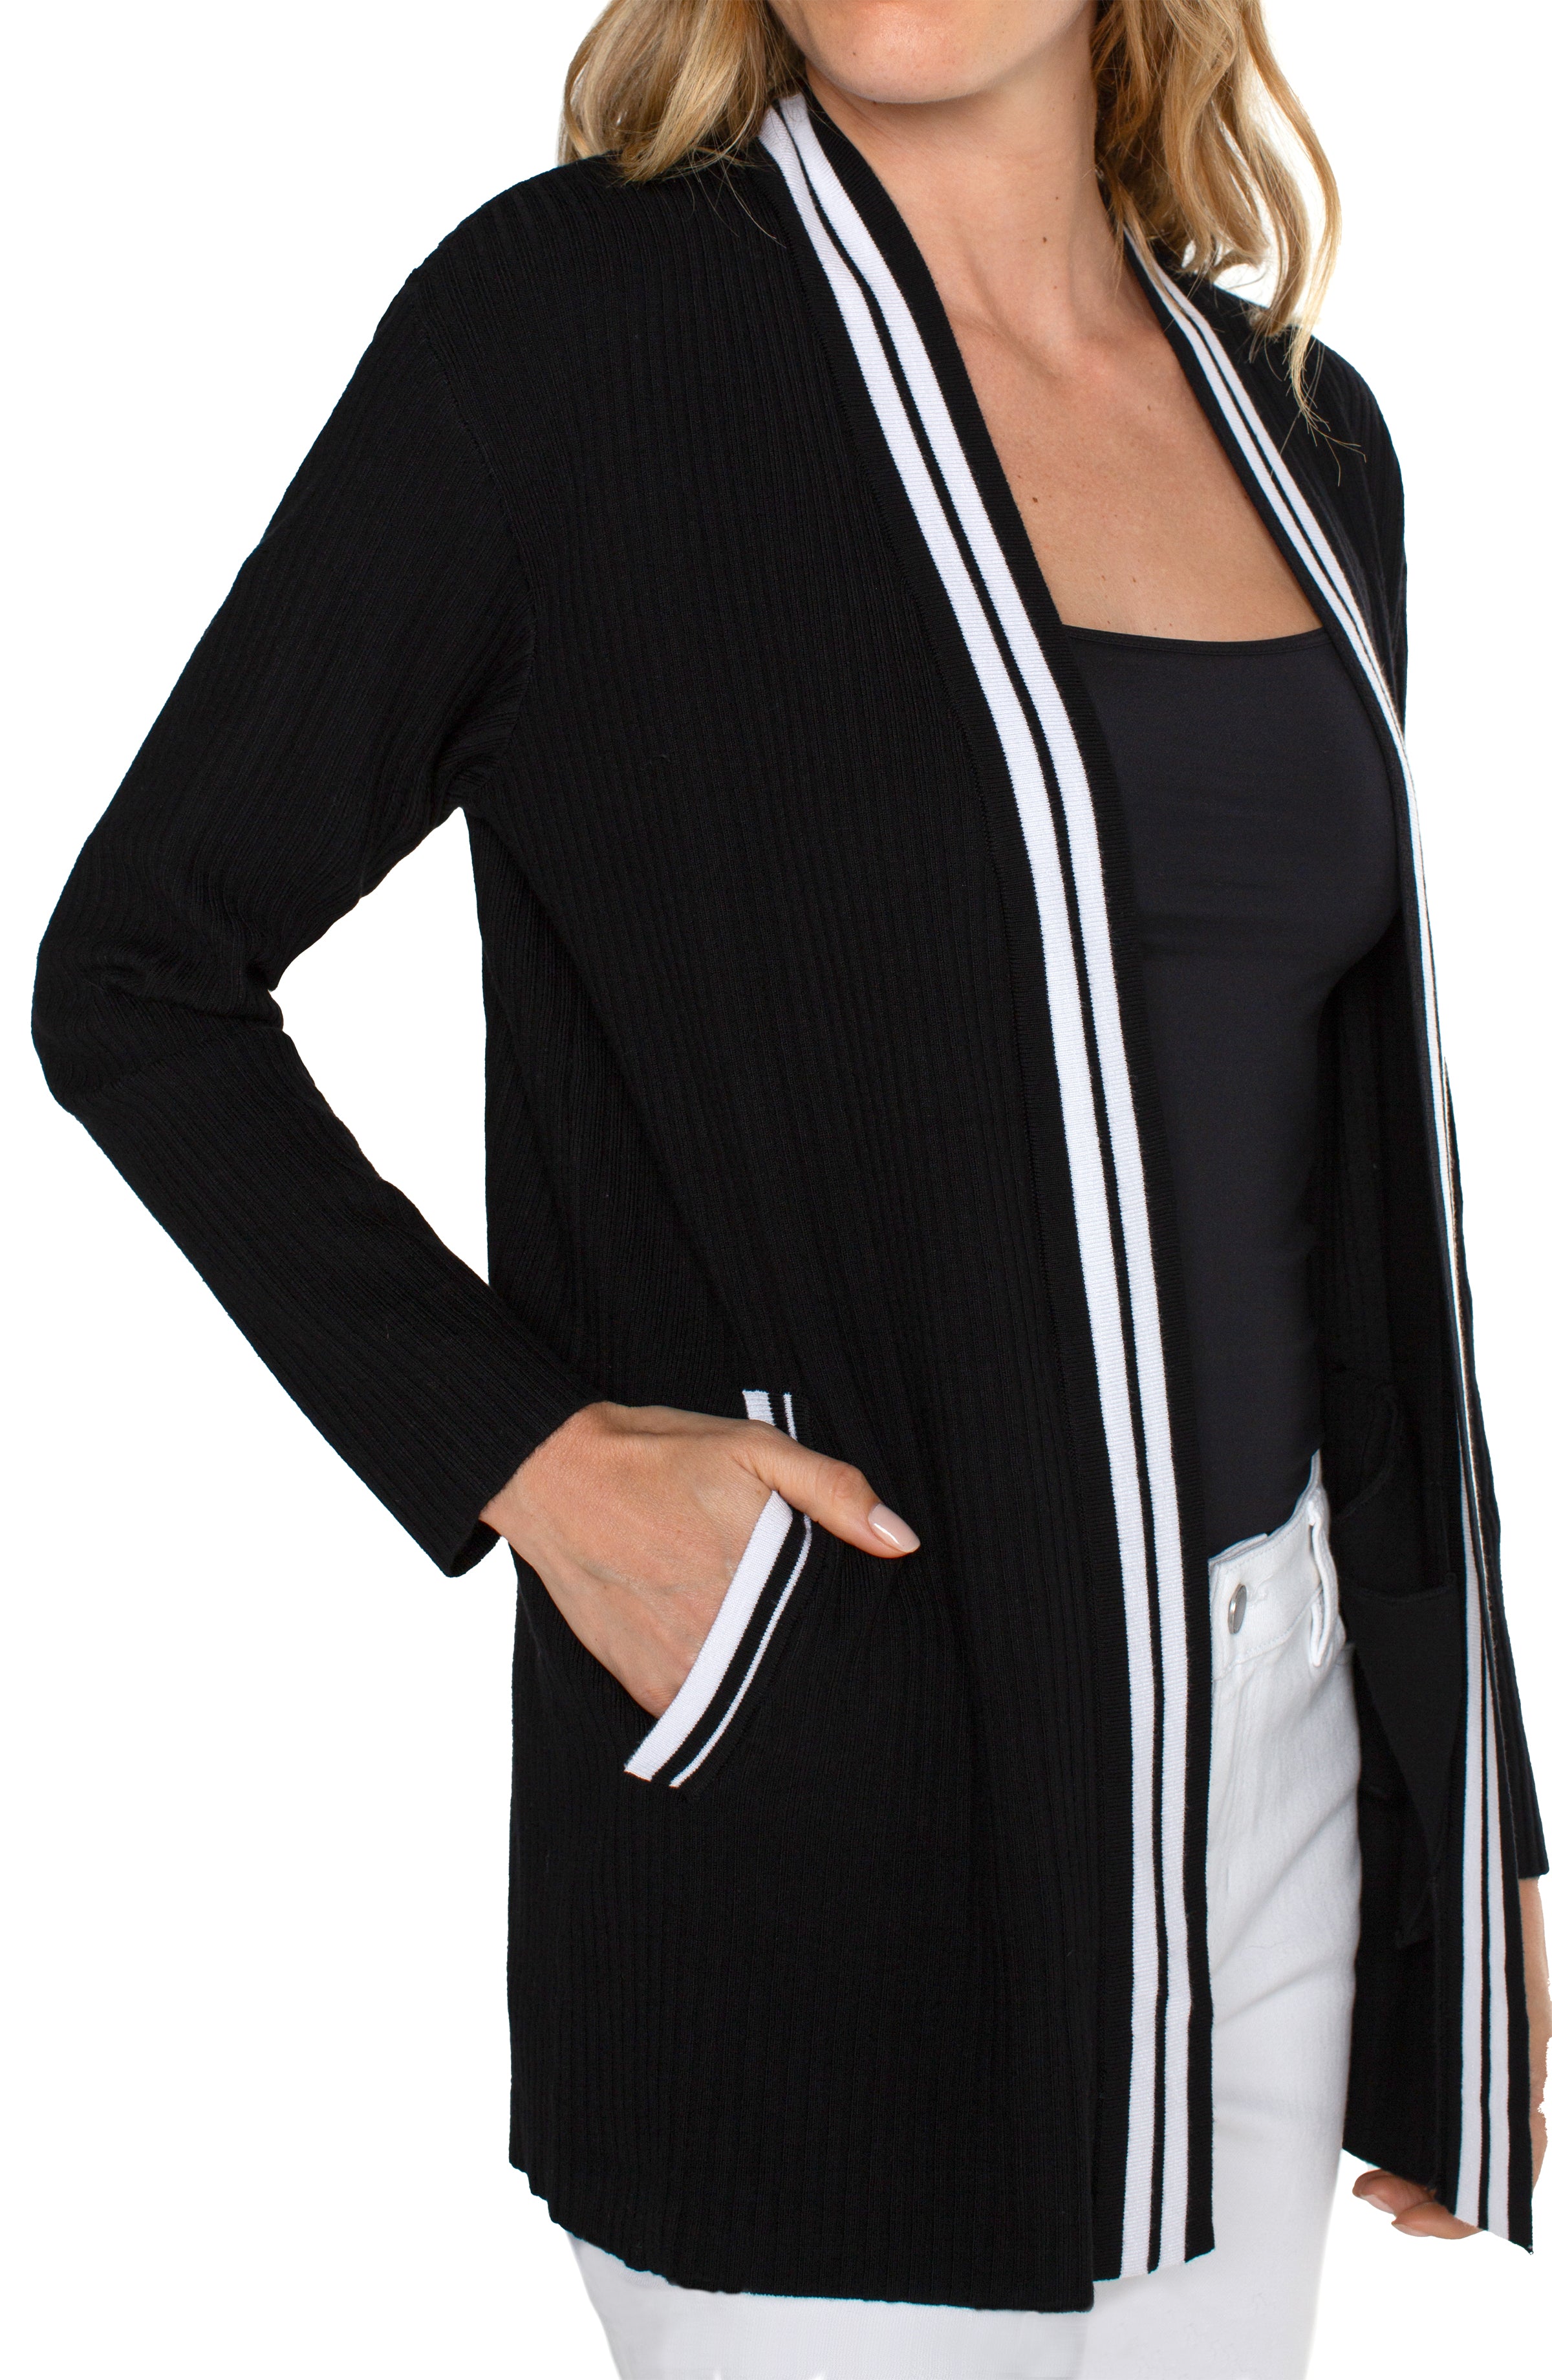 Liverpool Open Front Cardigan Sweater - black/white contrast Side View